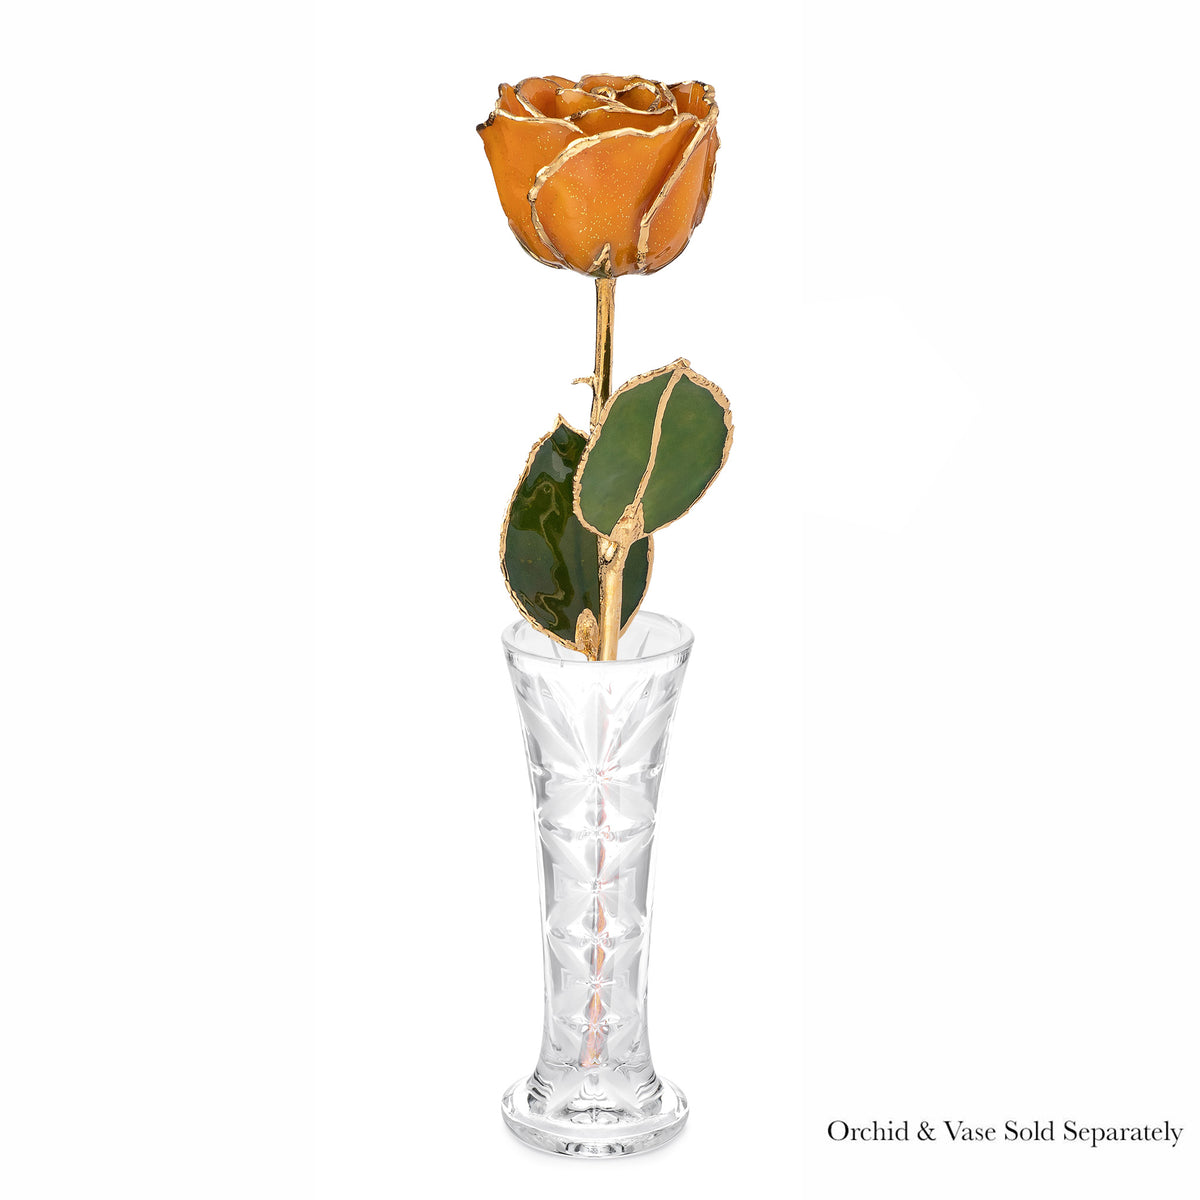 24K Gold Trimmed Forever Rose with Topaz or Citrine (Amber color) Petals with Gold colored Suspended Sparkles. View of Stem, Leaves, and Rose Petals and Showing Detail of Gold Trim. Shown with optional crystal bud vase